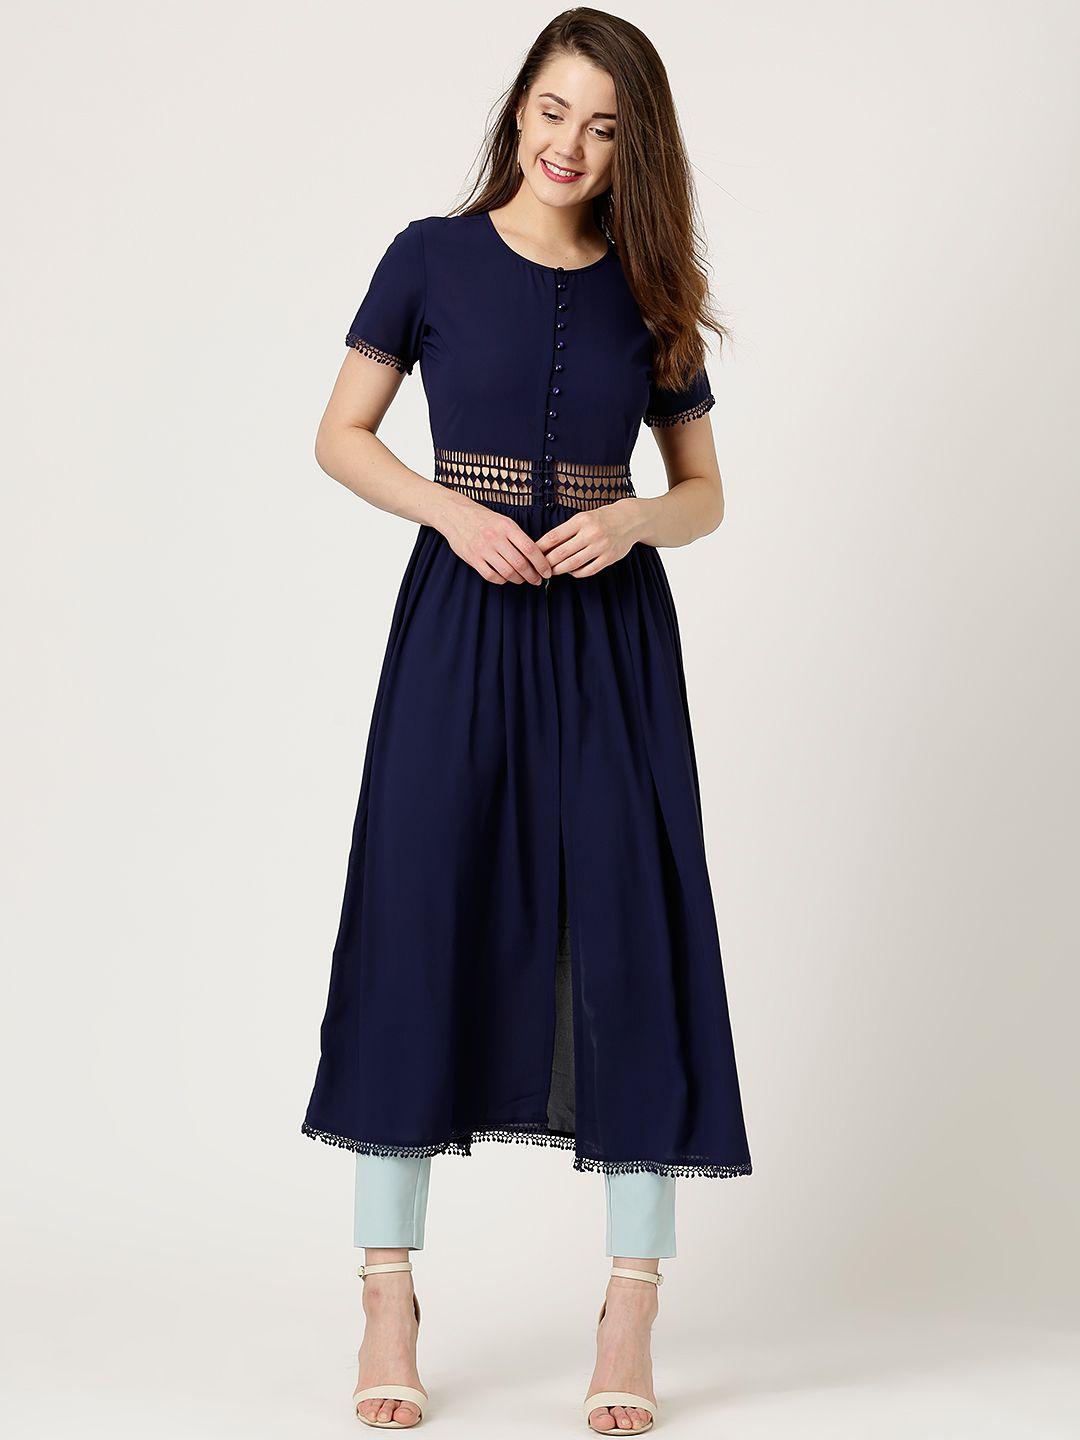 marie-claire-women-navy-solid-maxi-top